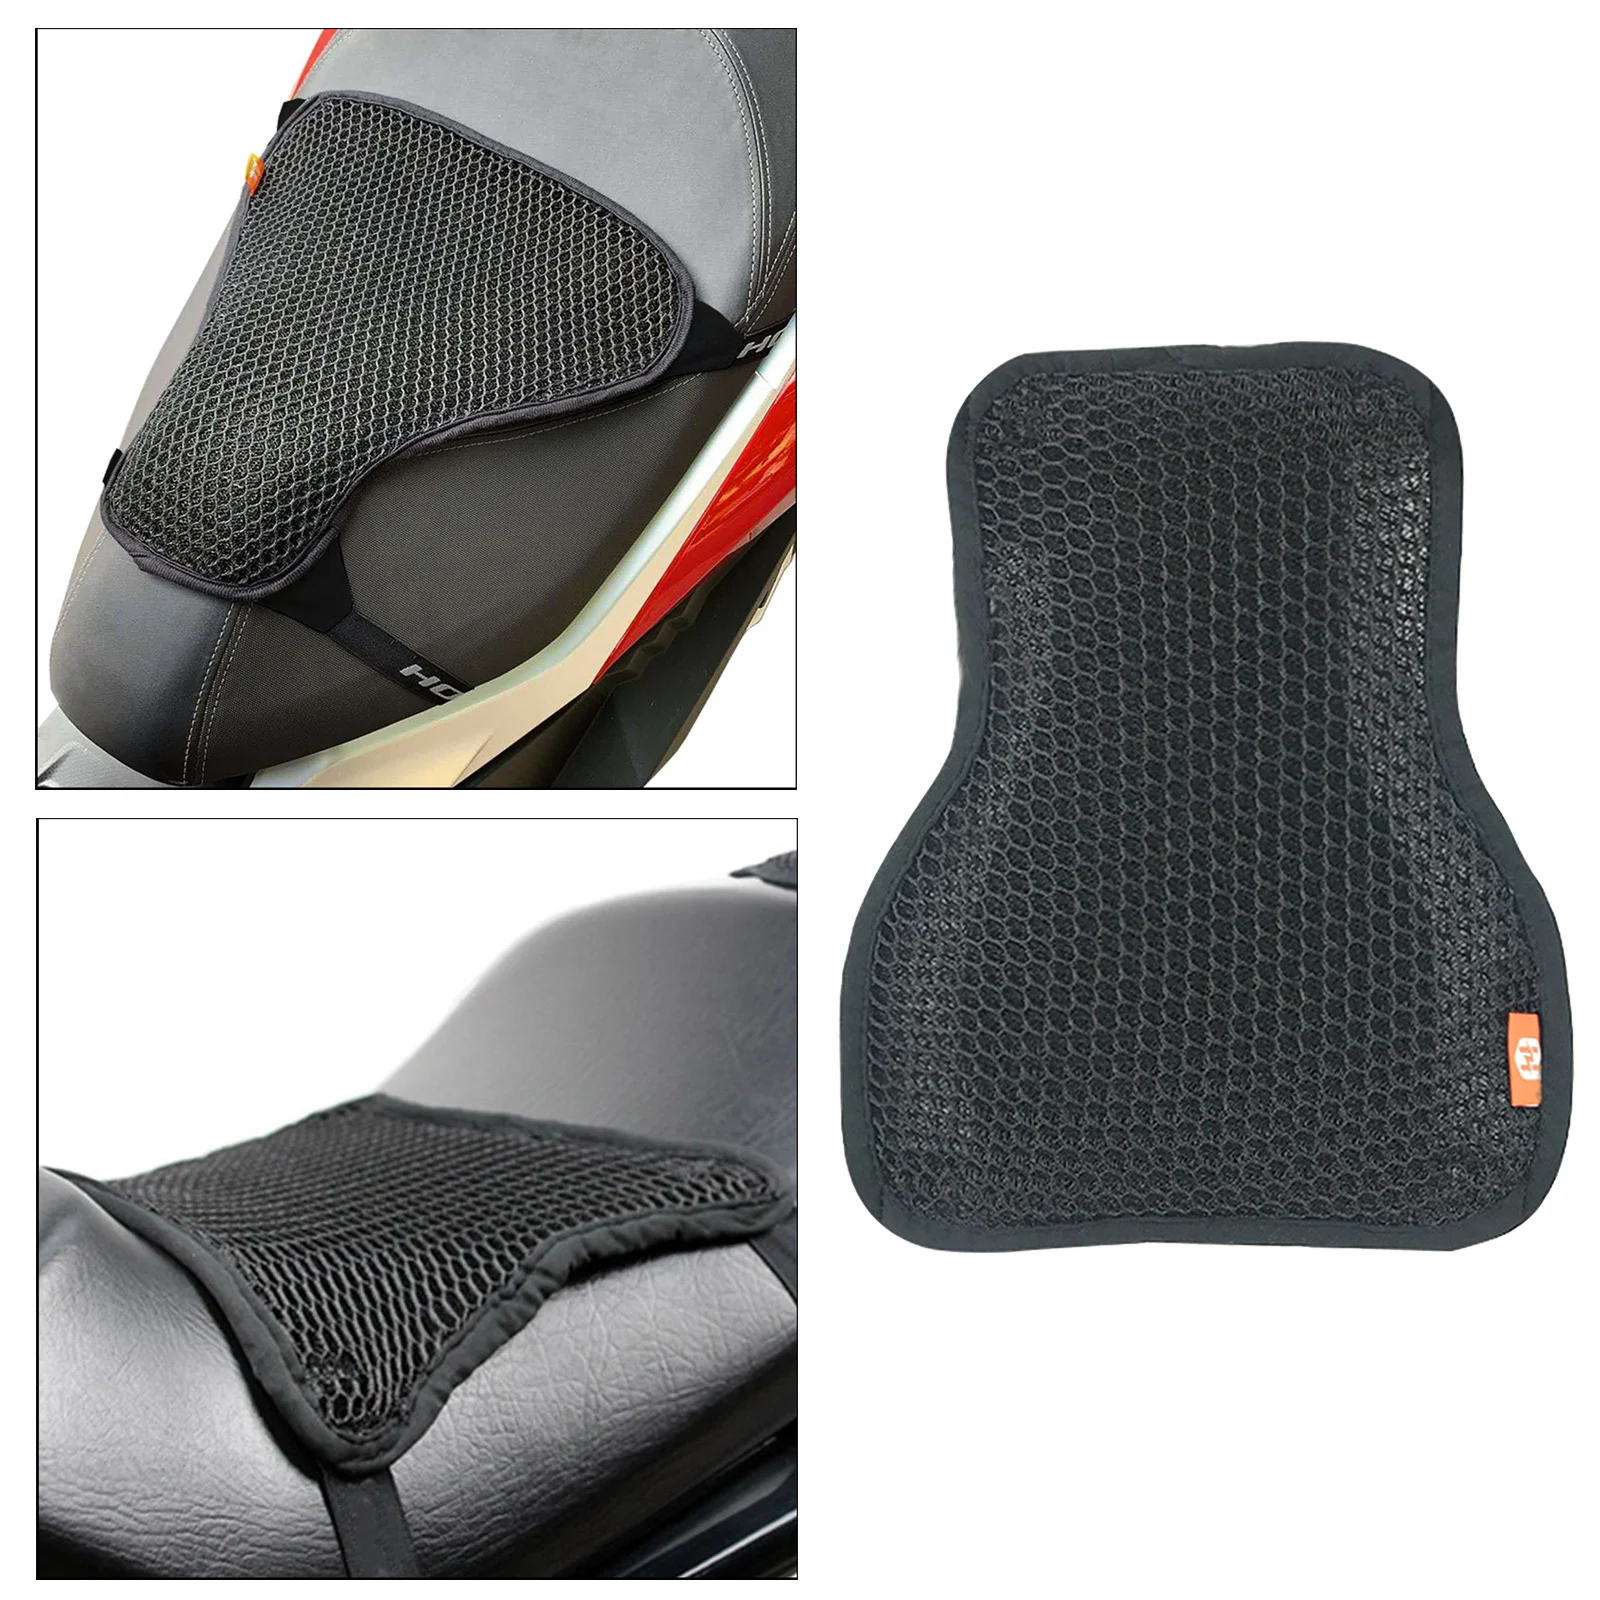 Motorcycle Seat Cushion Pad Breathable Cover Makes Long Rides More Comfortable and safe